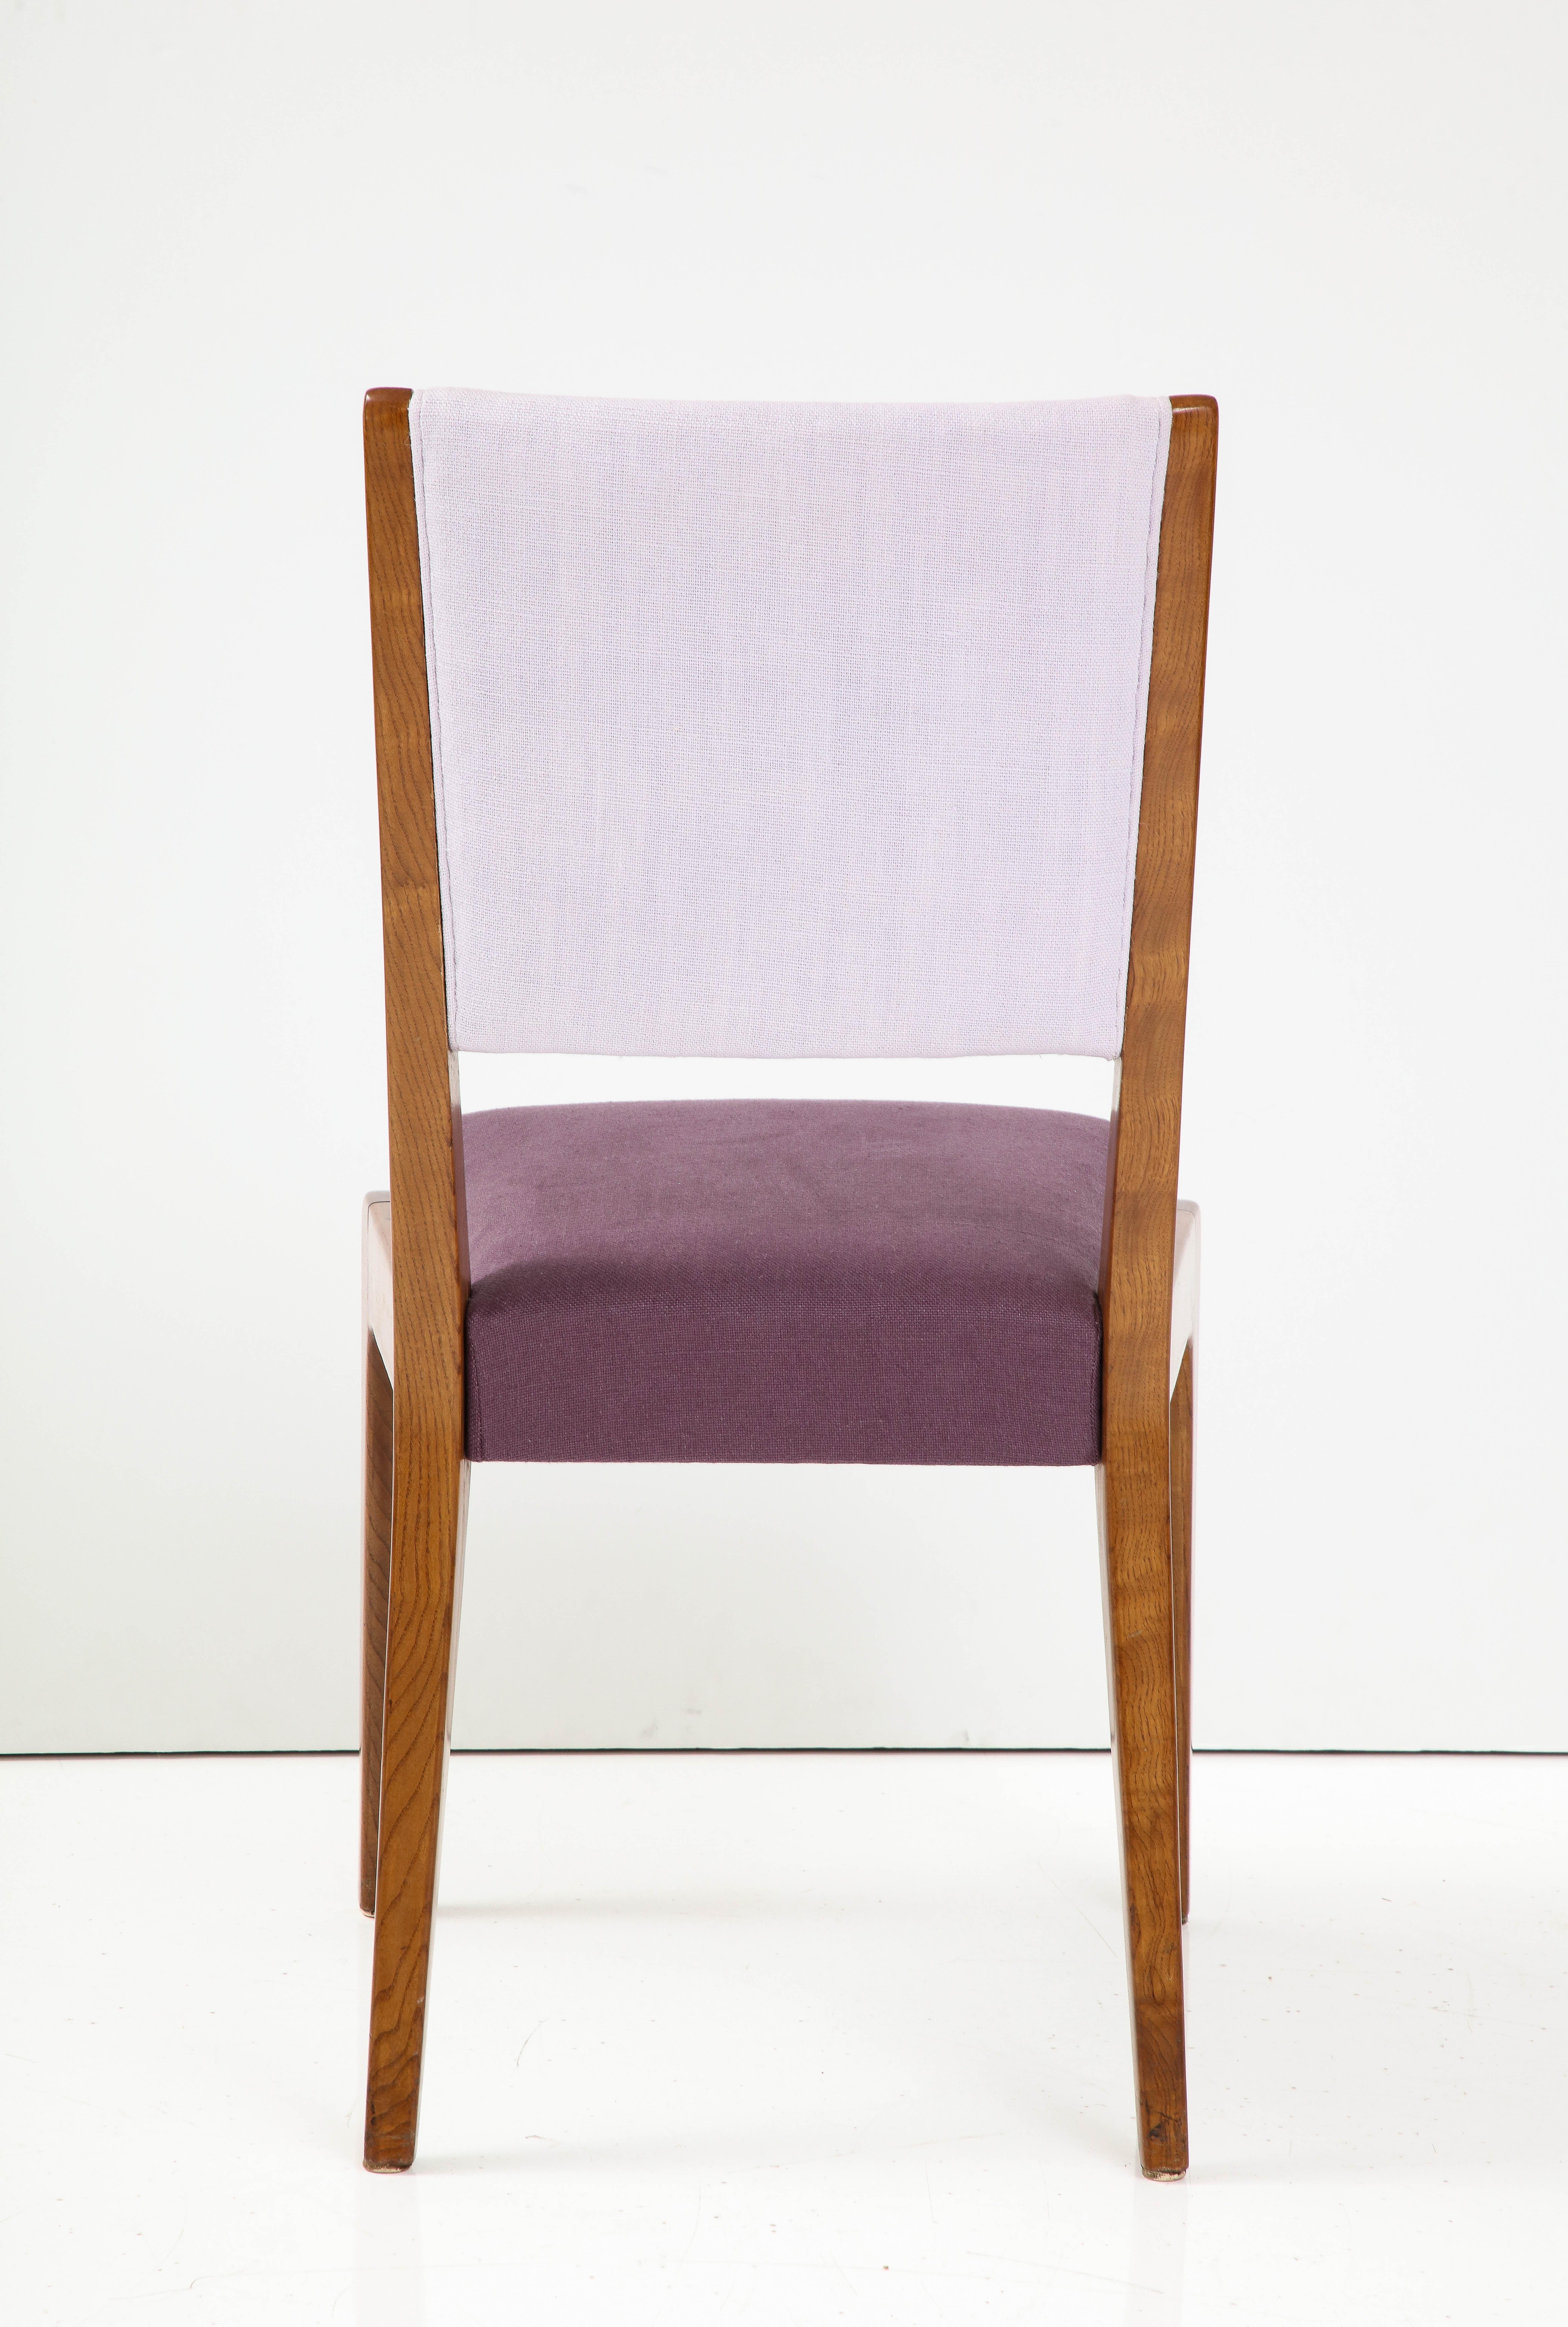 Linen Upholstered Oak Chair by Gio Ponti, Italy, circa. 1950s For Sale 5